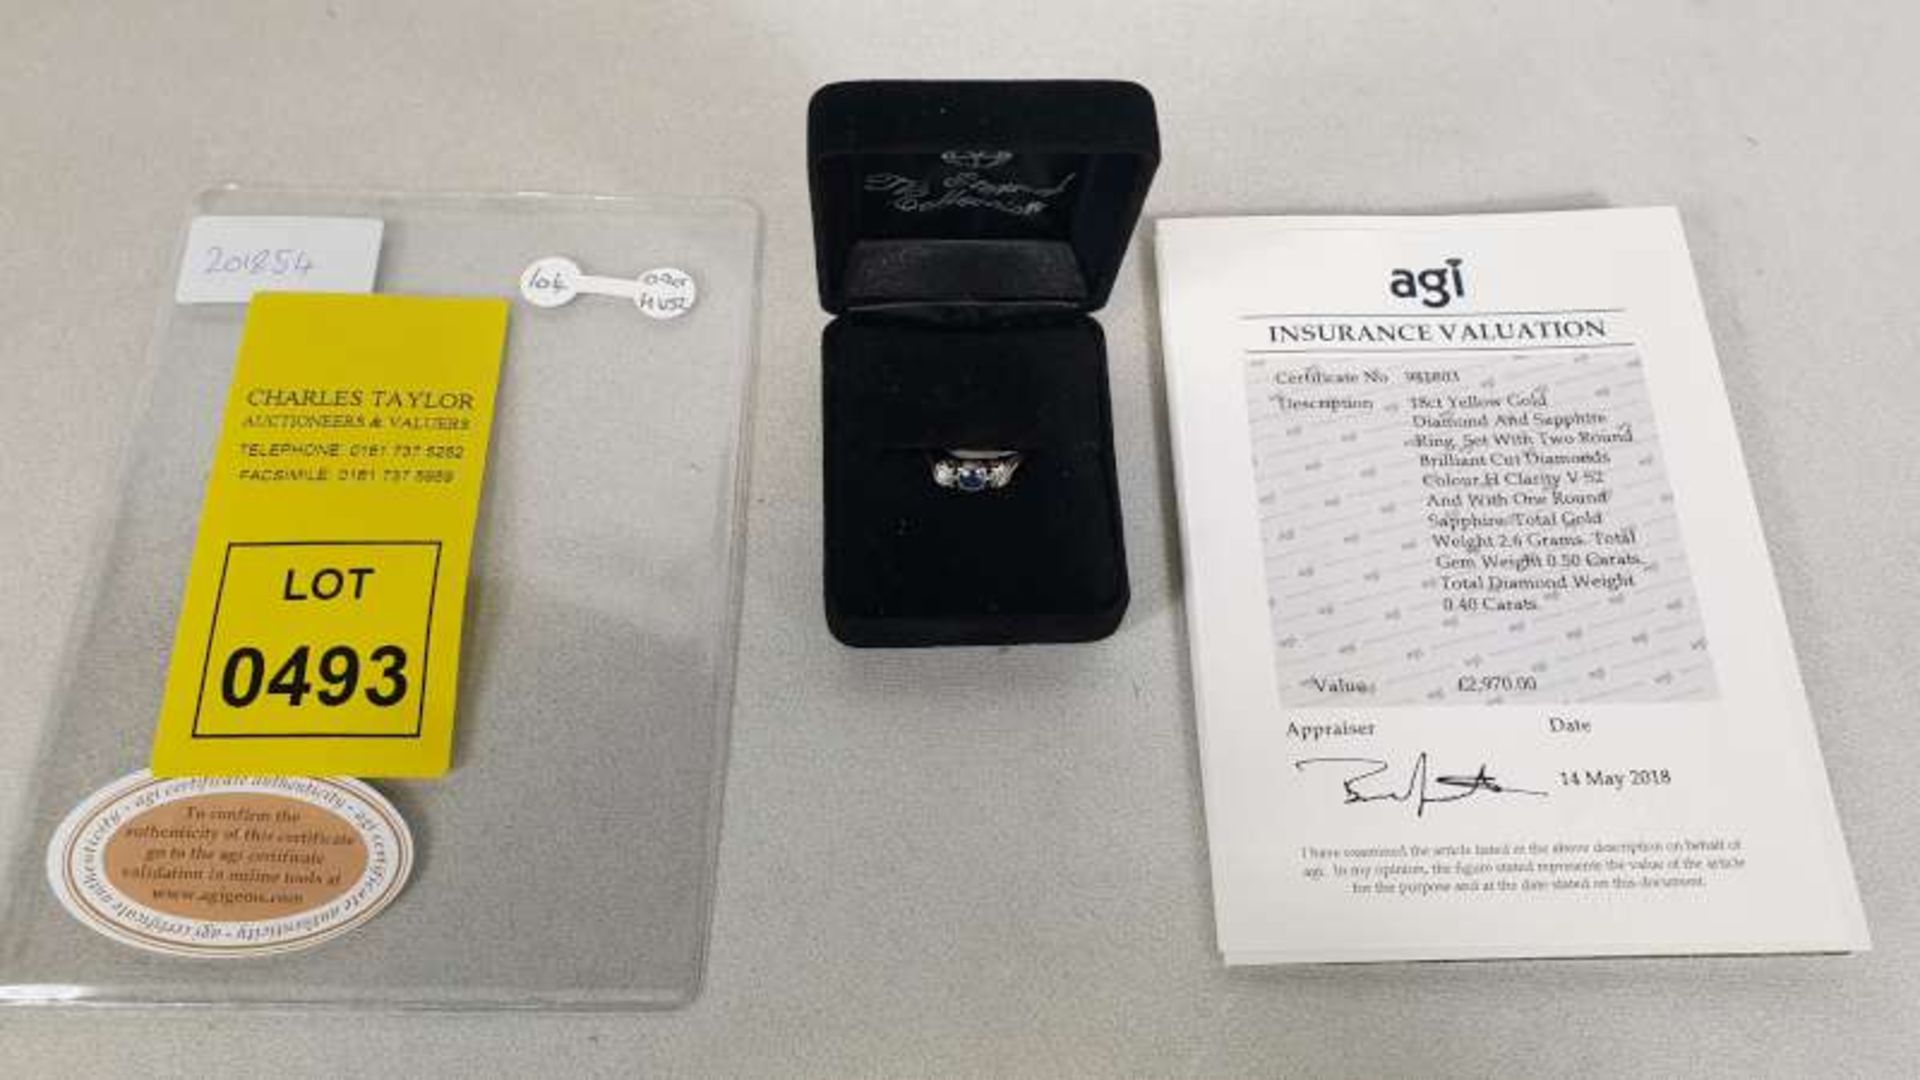 0.9CT H VS2 DIAMOND AND SAPPHIRE RING SET IN 18CT YELLOW GOLD WITH CERTIFICATION REF AGI/981803